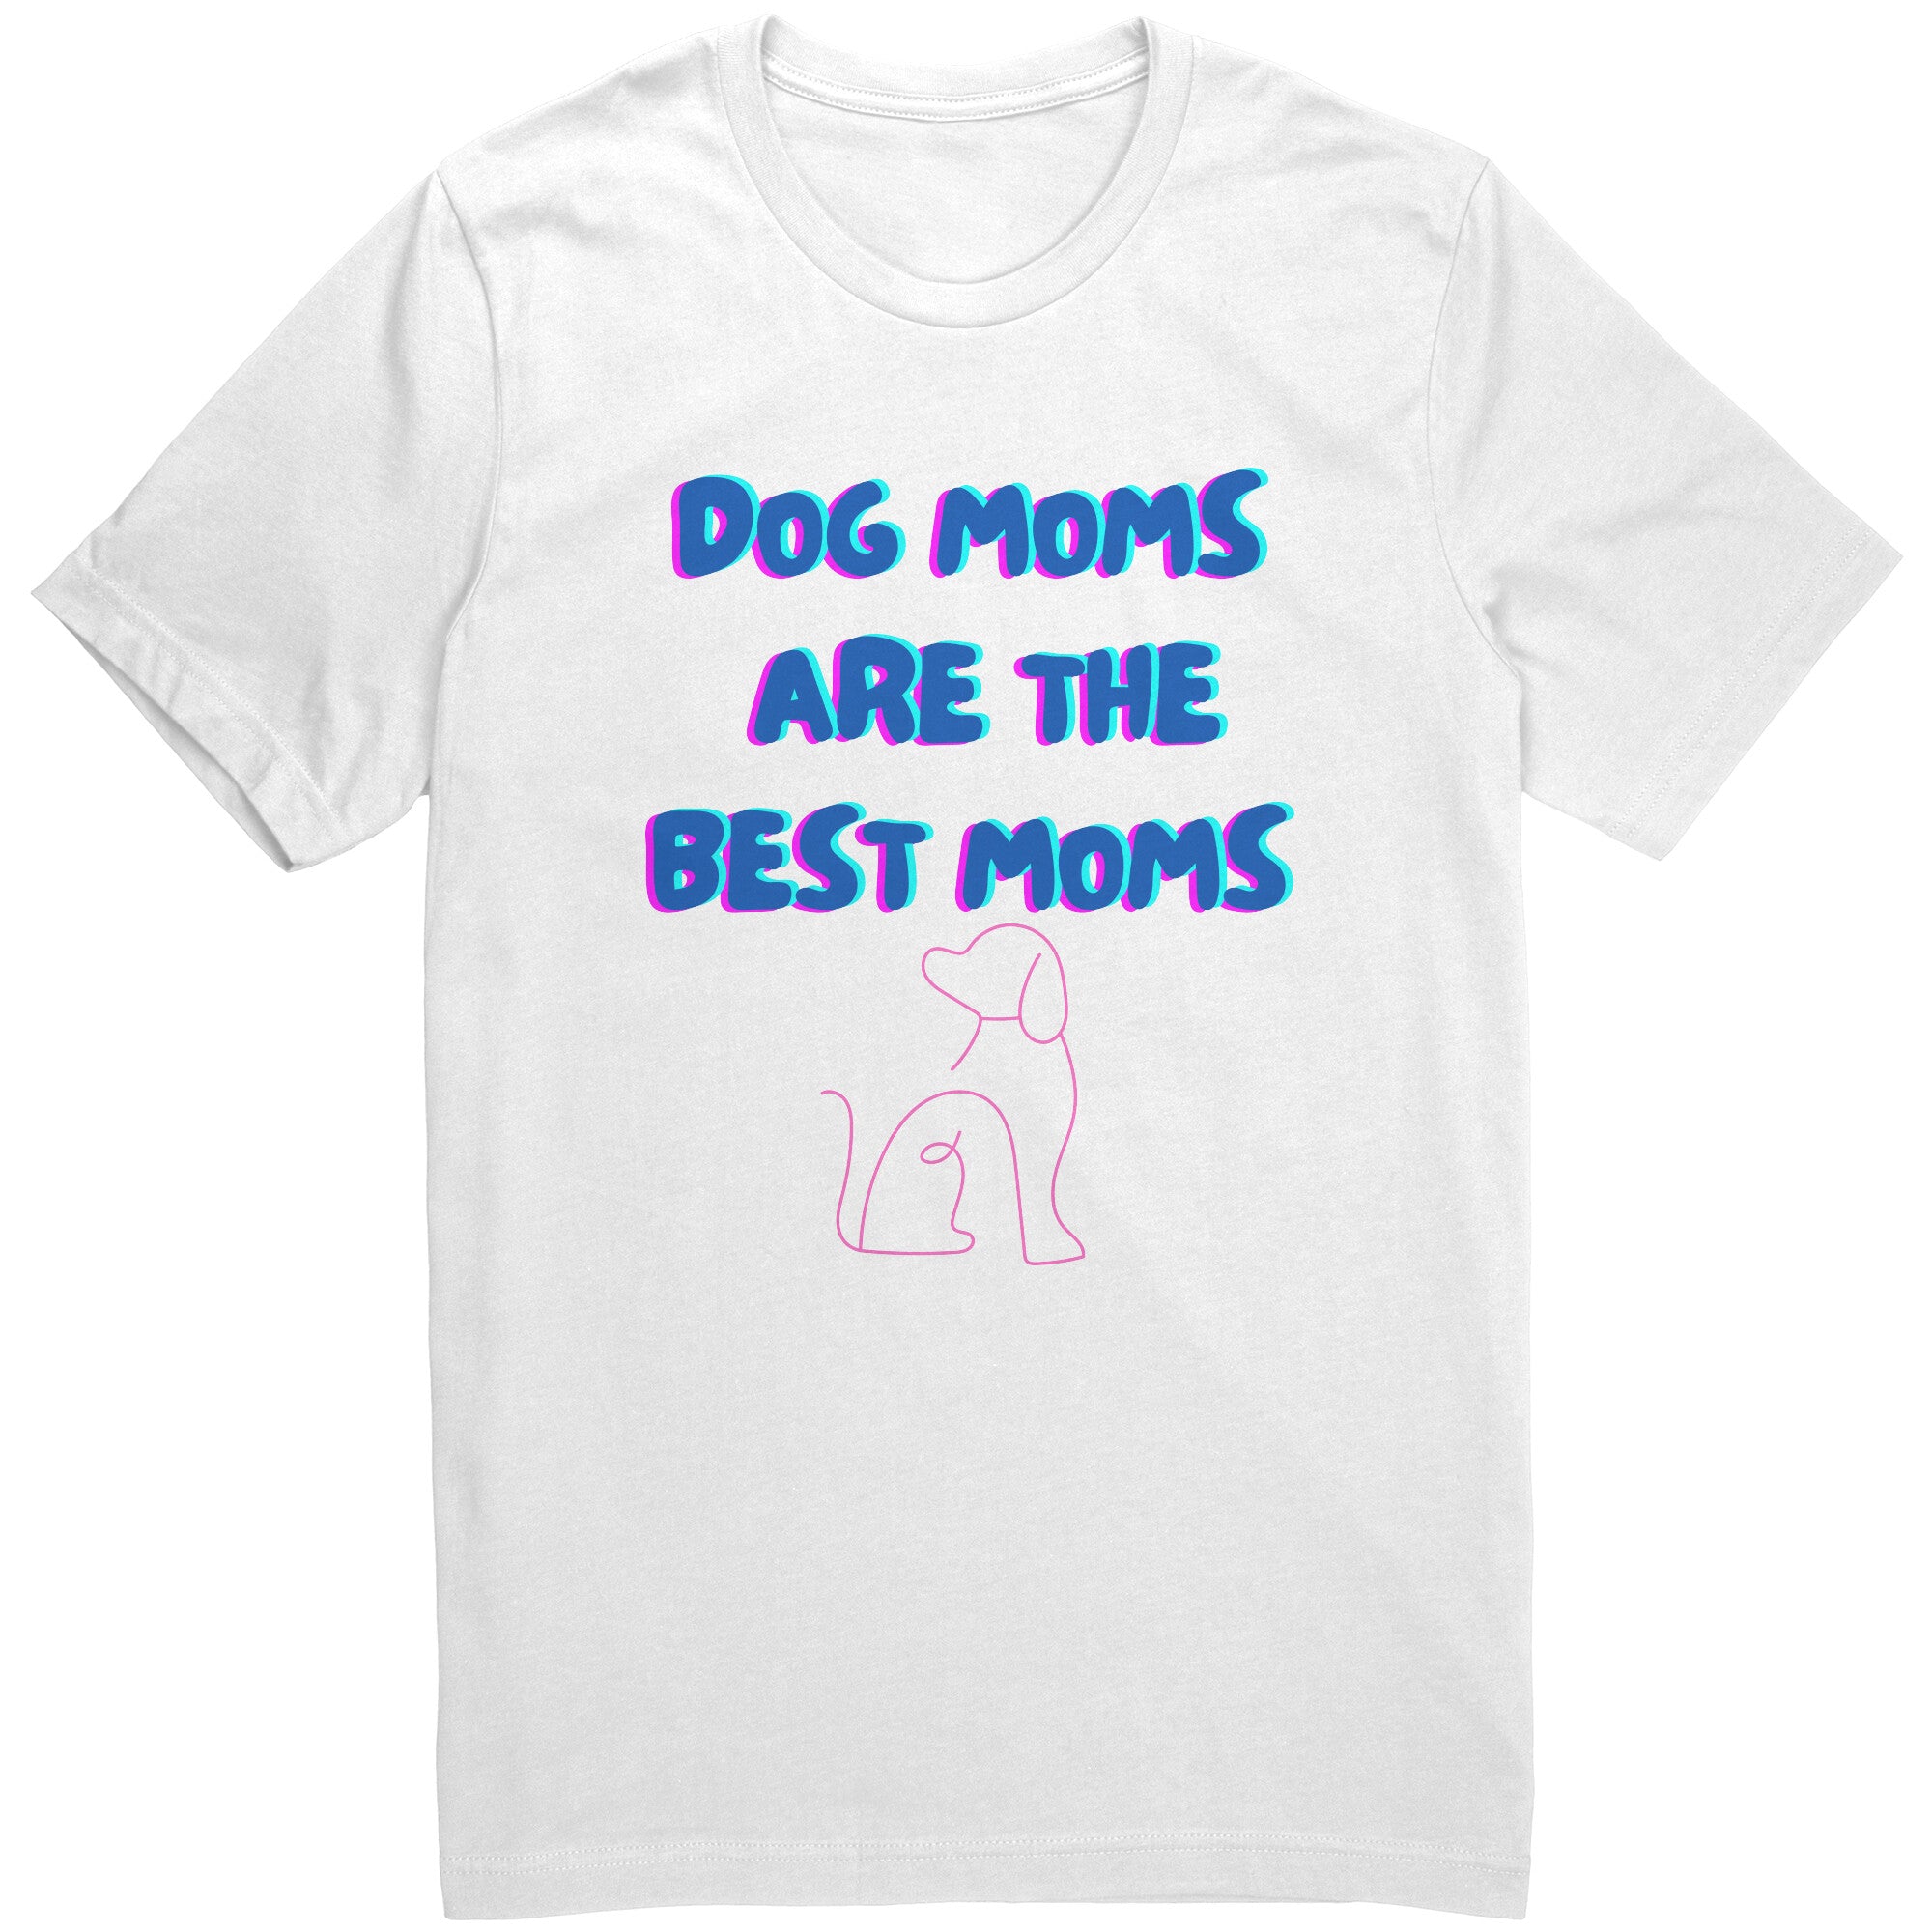 Dog Moms Are The Best Moms T-Shirt